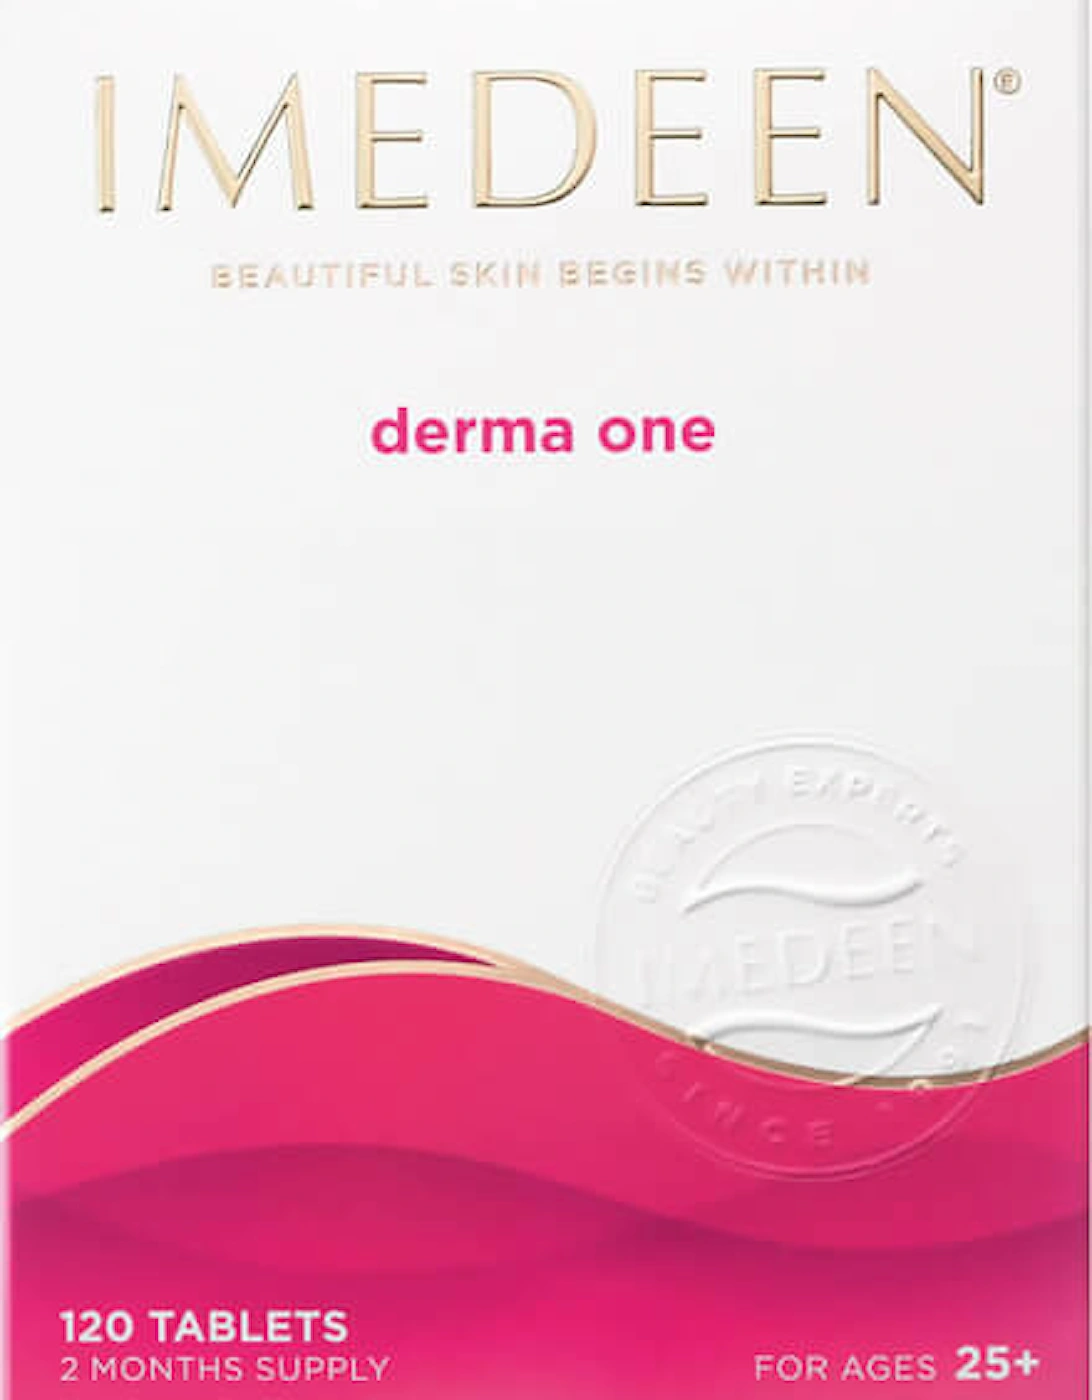 Derma One Beauty & Skin Supplement for Women, contains Vitamin C and Zinc, 120 Tablets, Age 25+ - Imedeen, 2 of 1